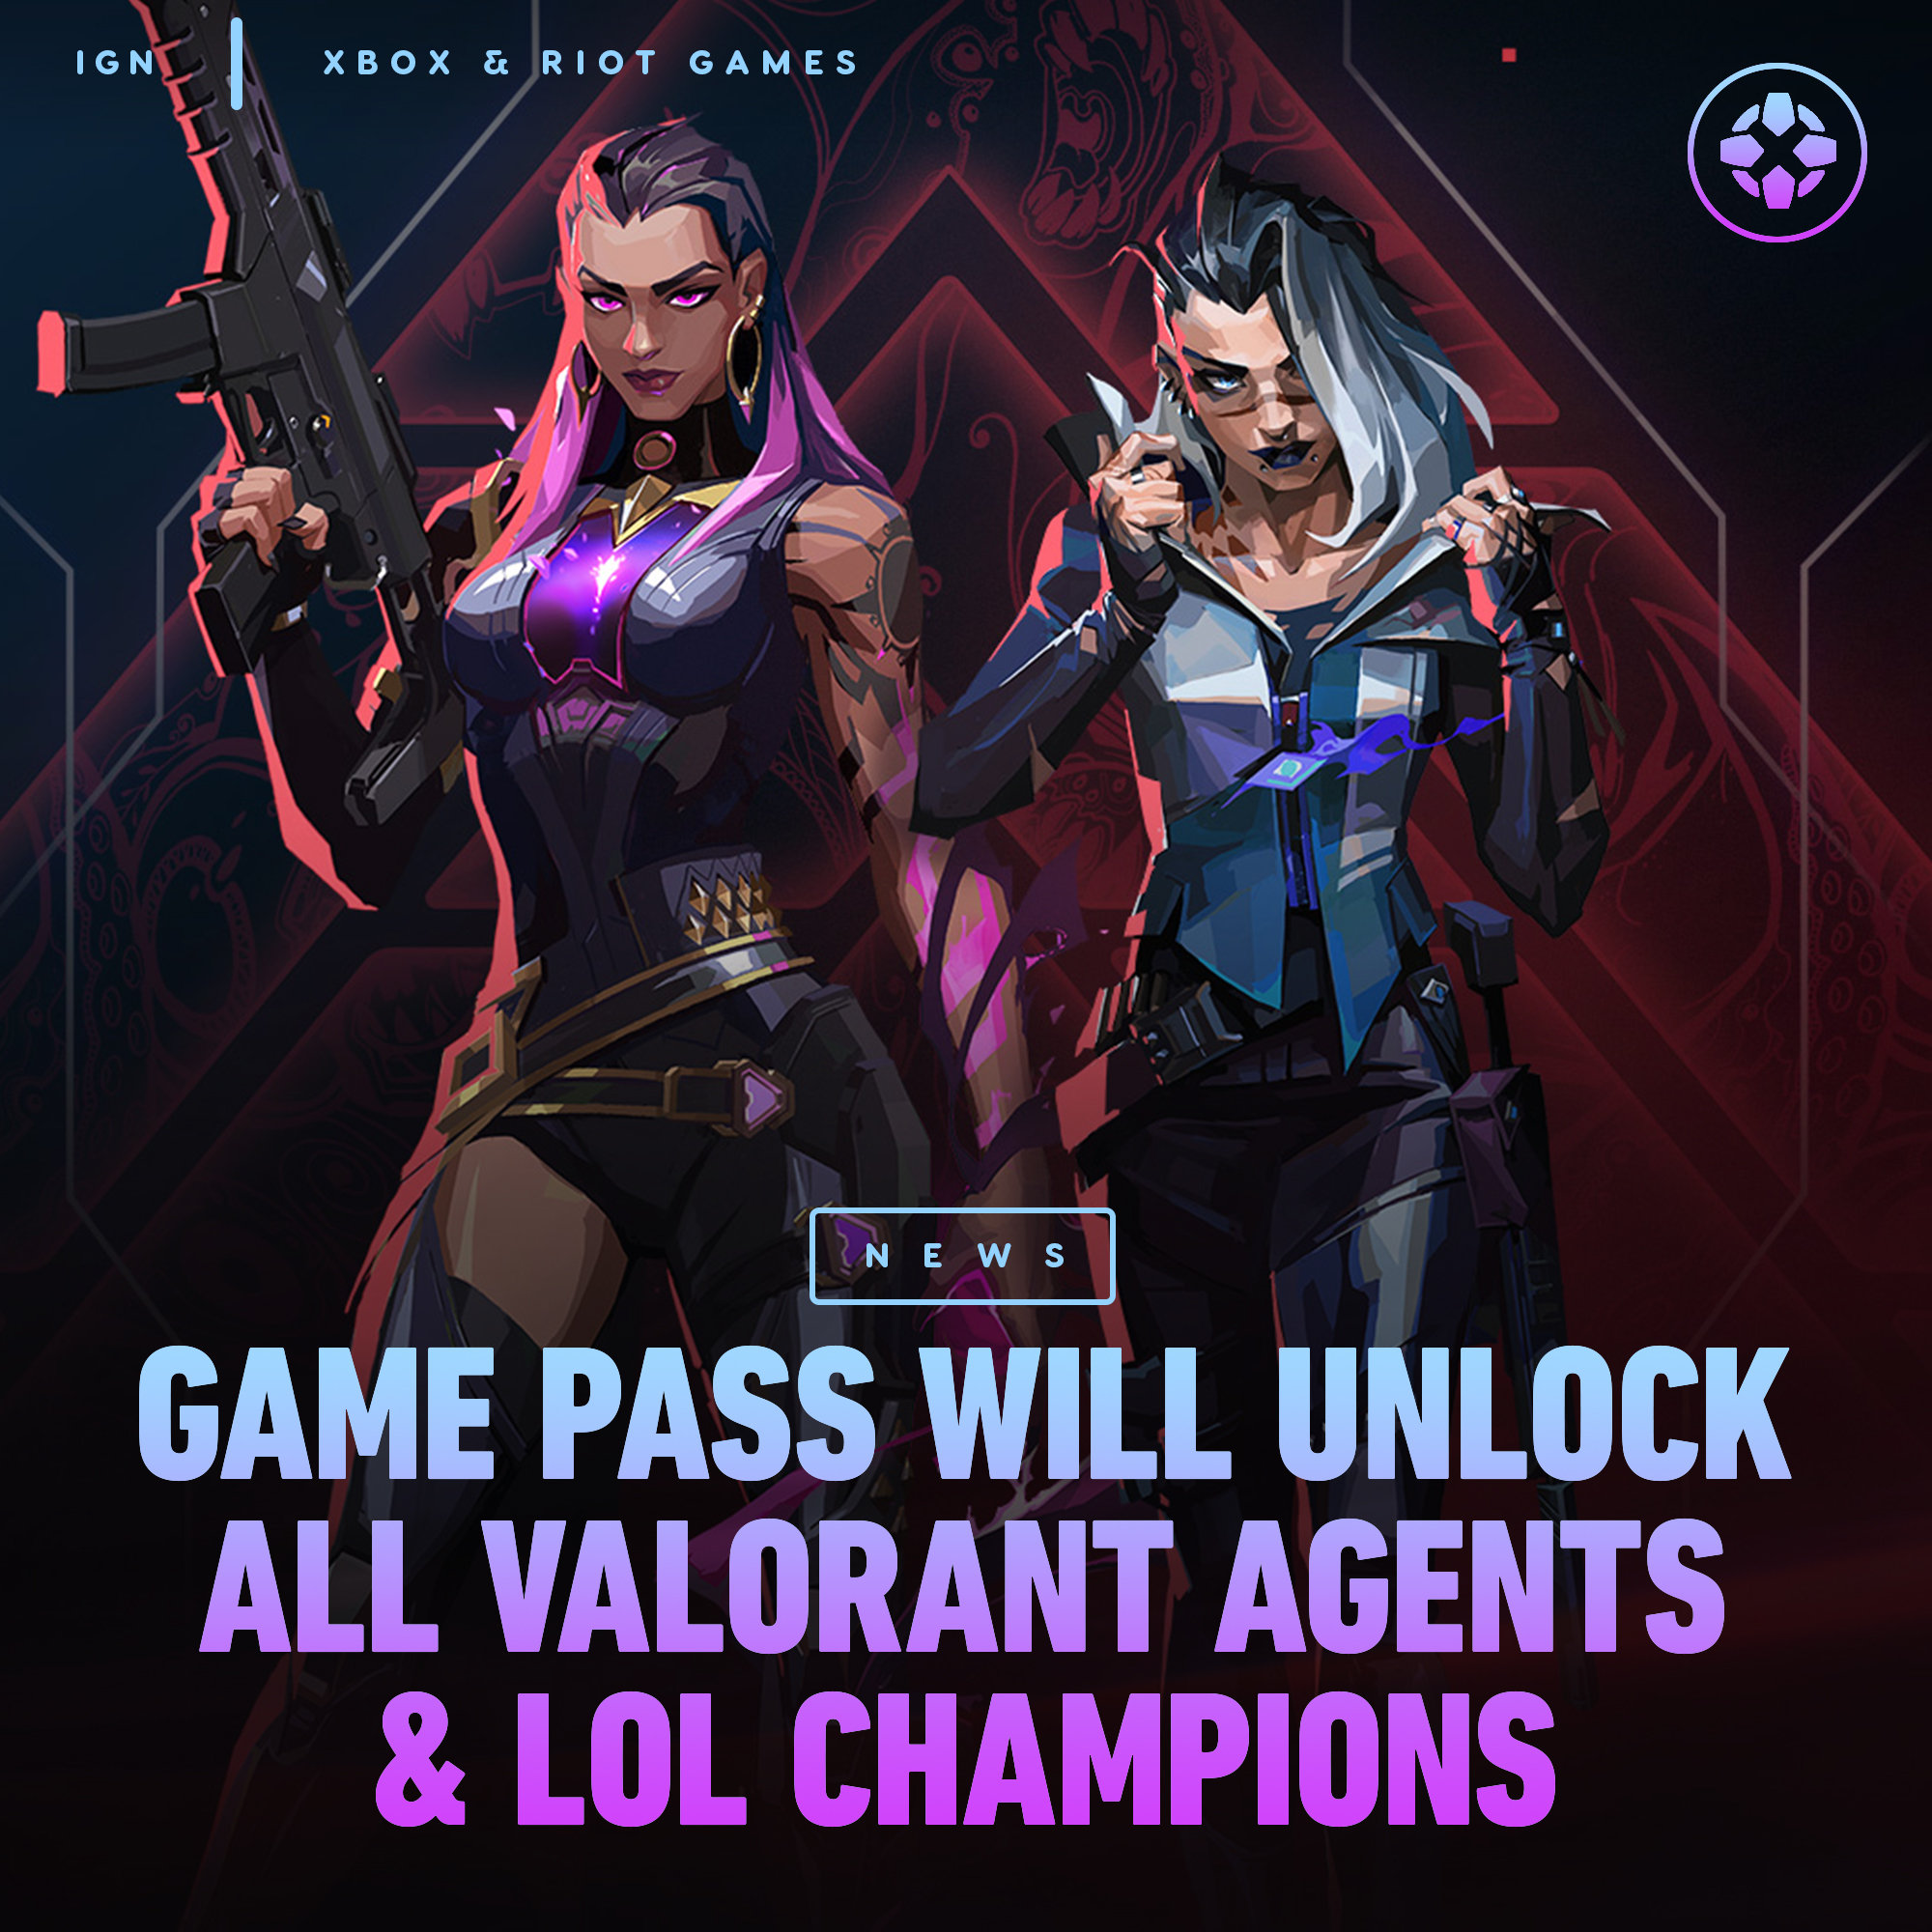 IGN on Twitter: "All champions will be unlocked in League of Legends on  Xbox Game Pass, as well as Valorant agents and other characters in Legends  of Runeterra and Teamfight Tactics. #XboxBethesda #